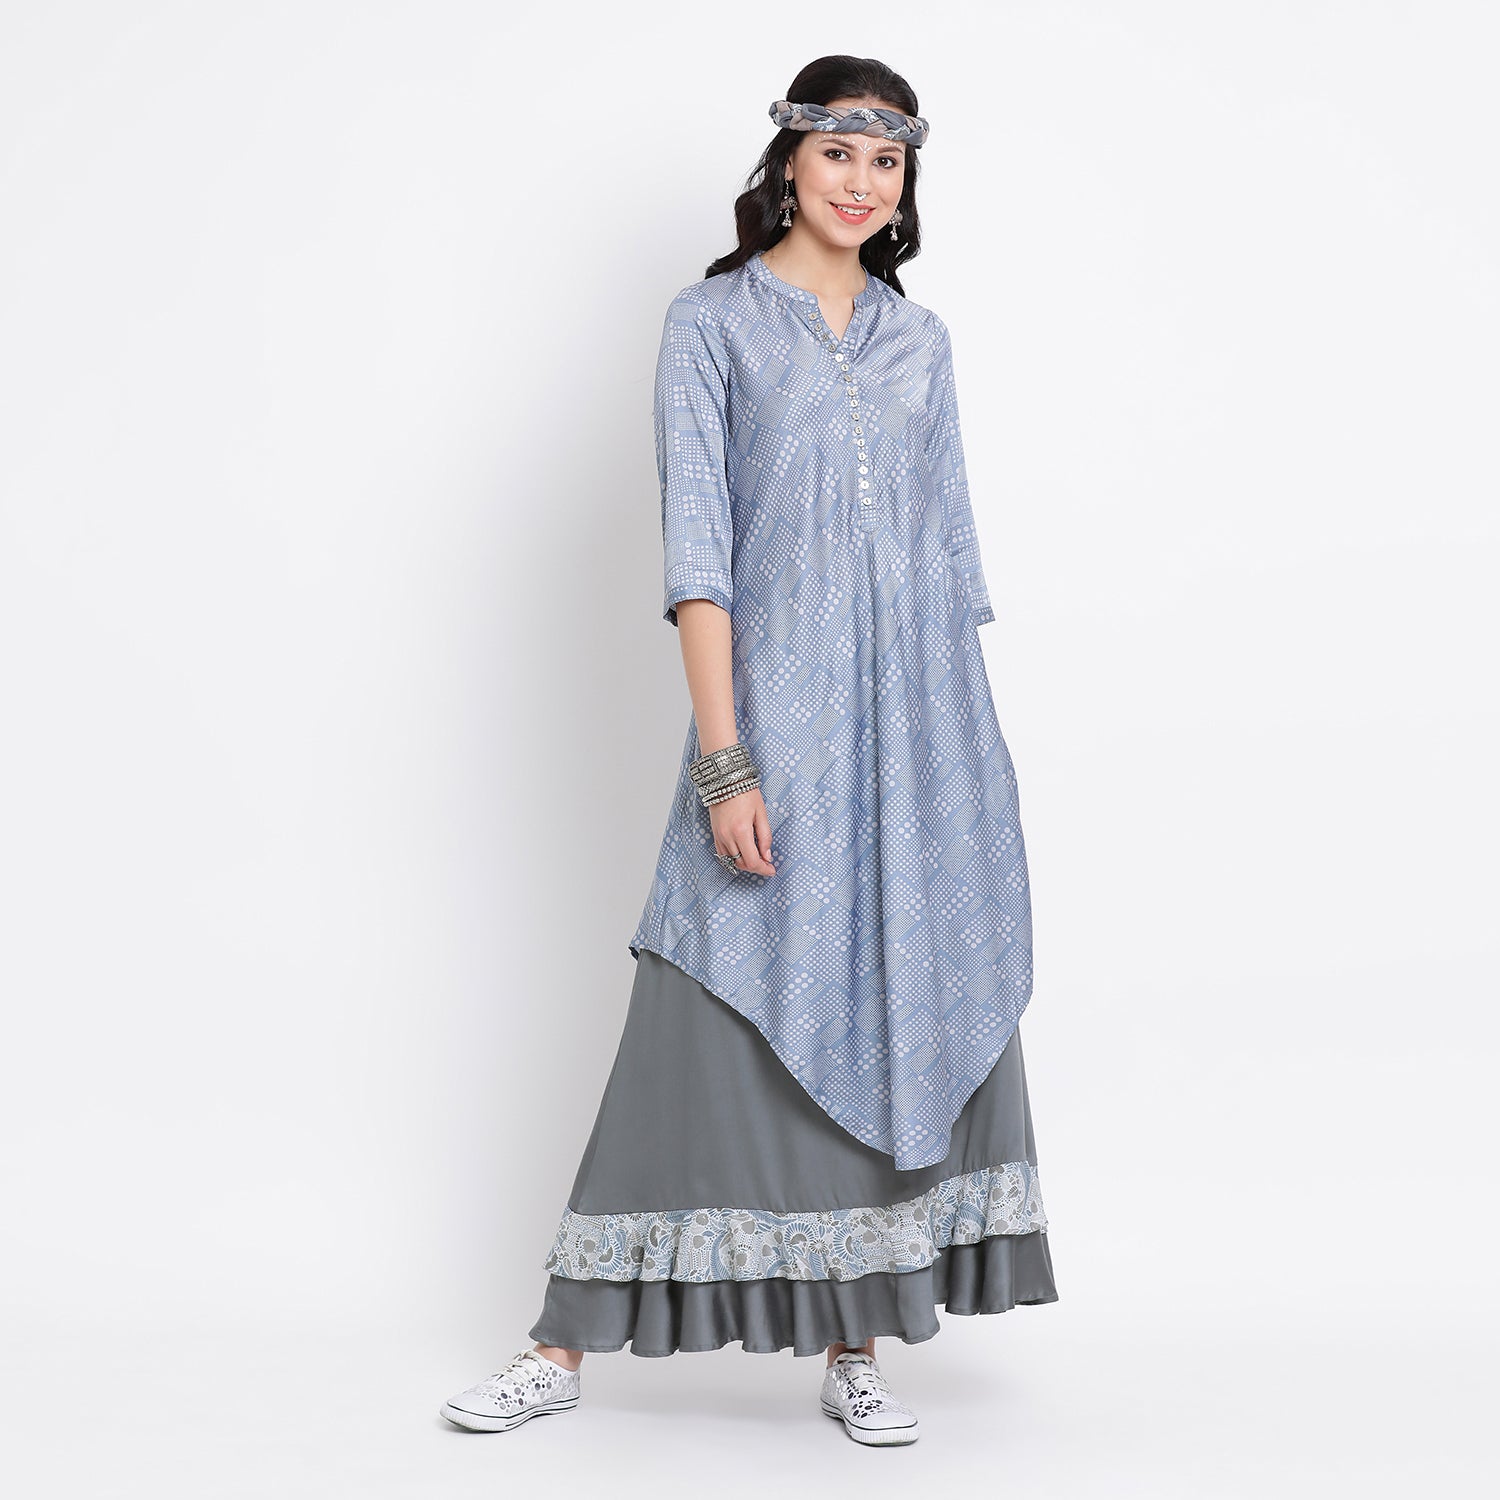 Stone Blue long skirt with printed frill at bottom